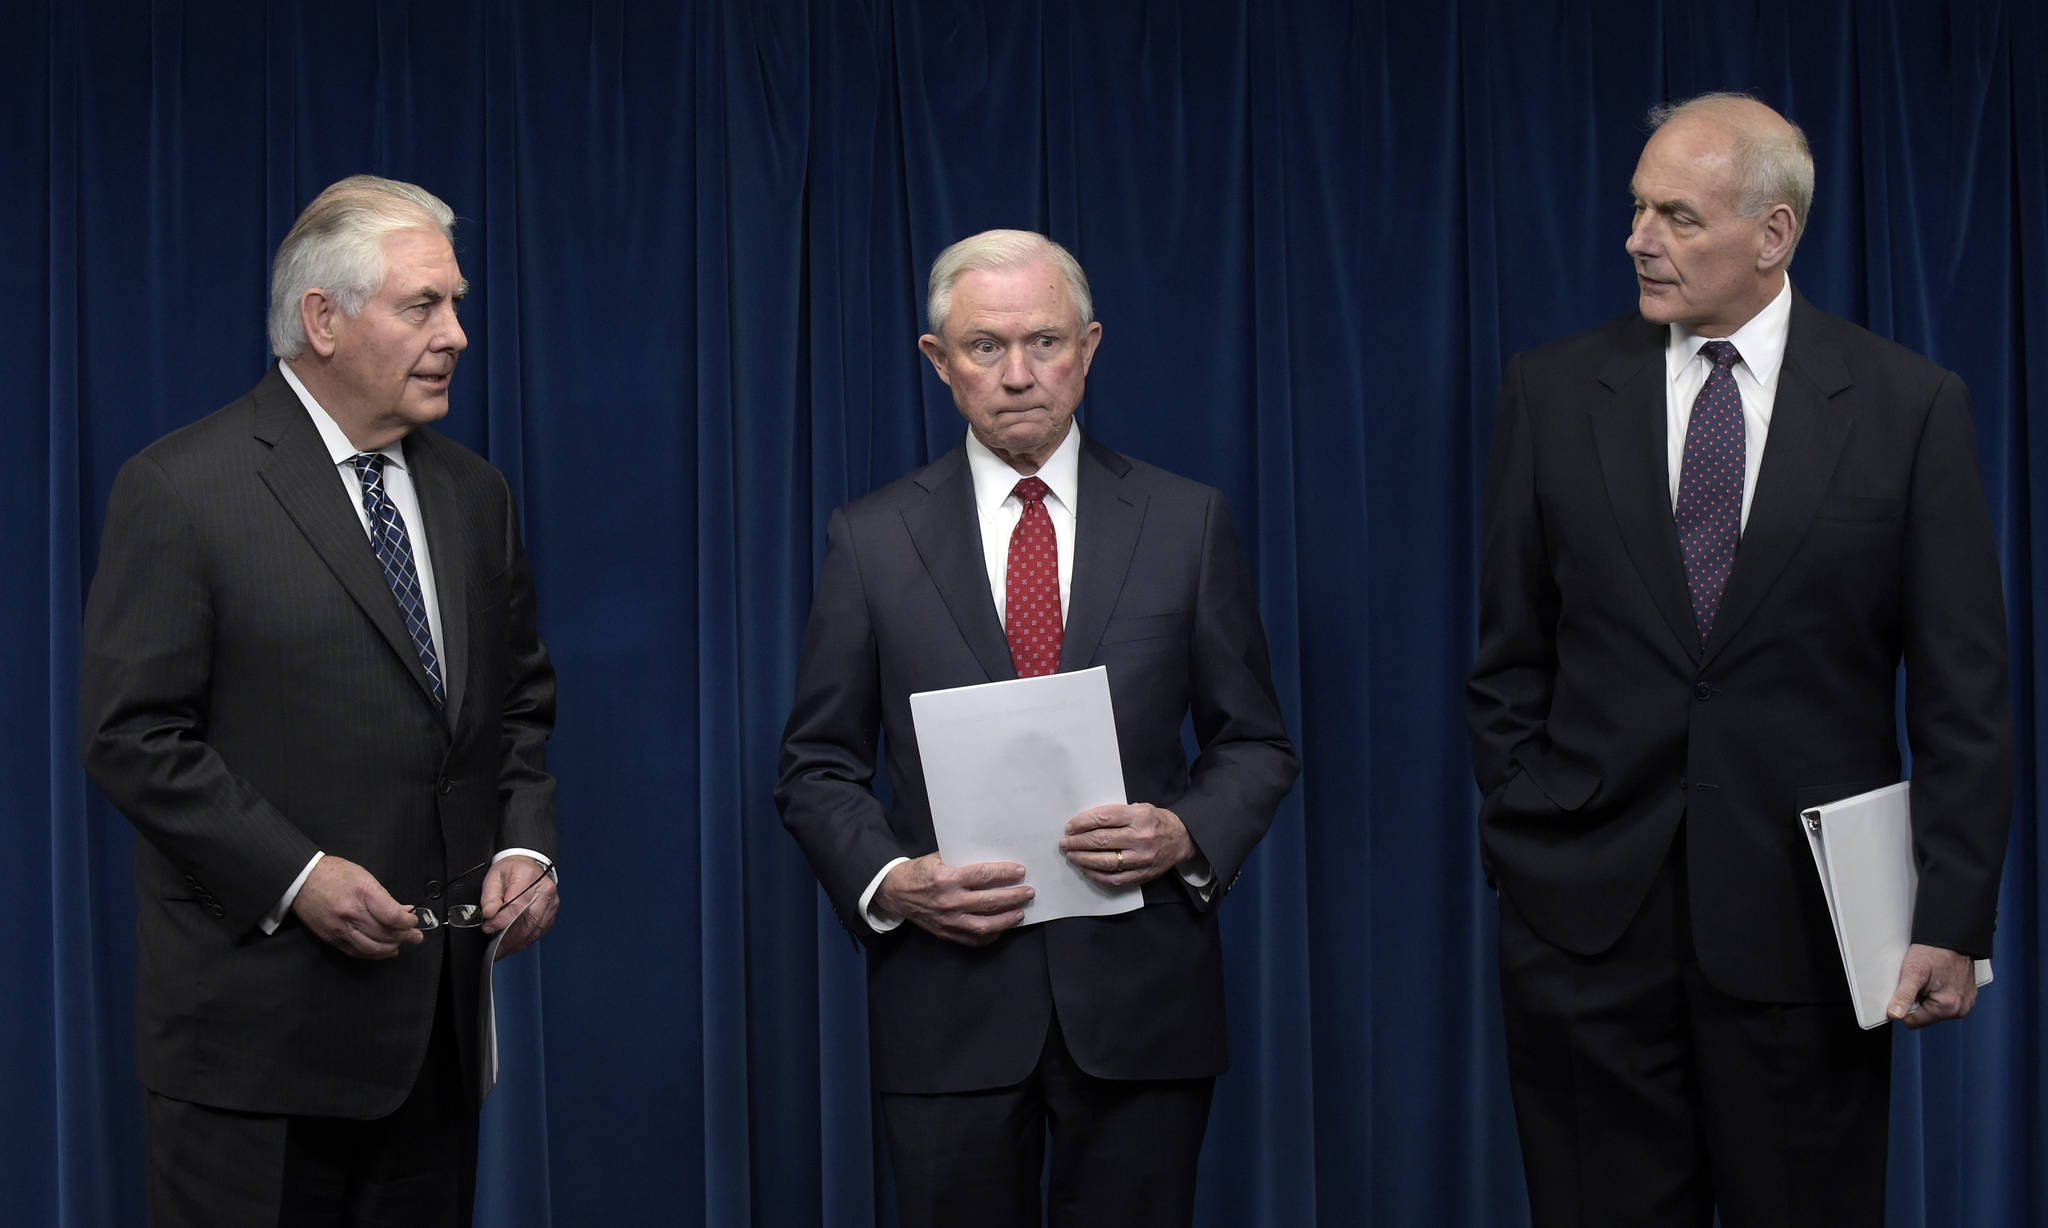 From left, Secretary of State Rex Tillerson, Attorney General Jeff Sessions and Homeland Security Secretary John Kelly arrive for a news conference at the U.S. Customs and Border Protection office Monday to make statements on issues related to visas and travel. (Susan Walsh/The Associated Press)